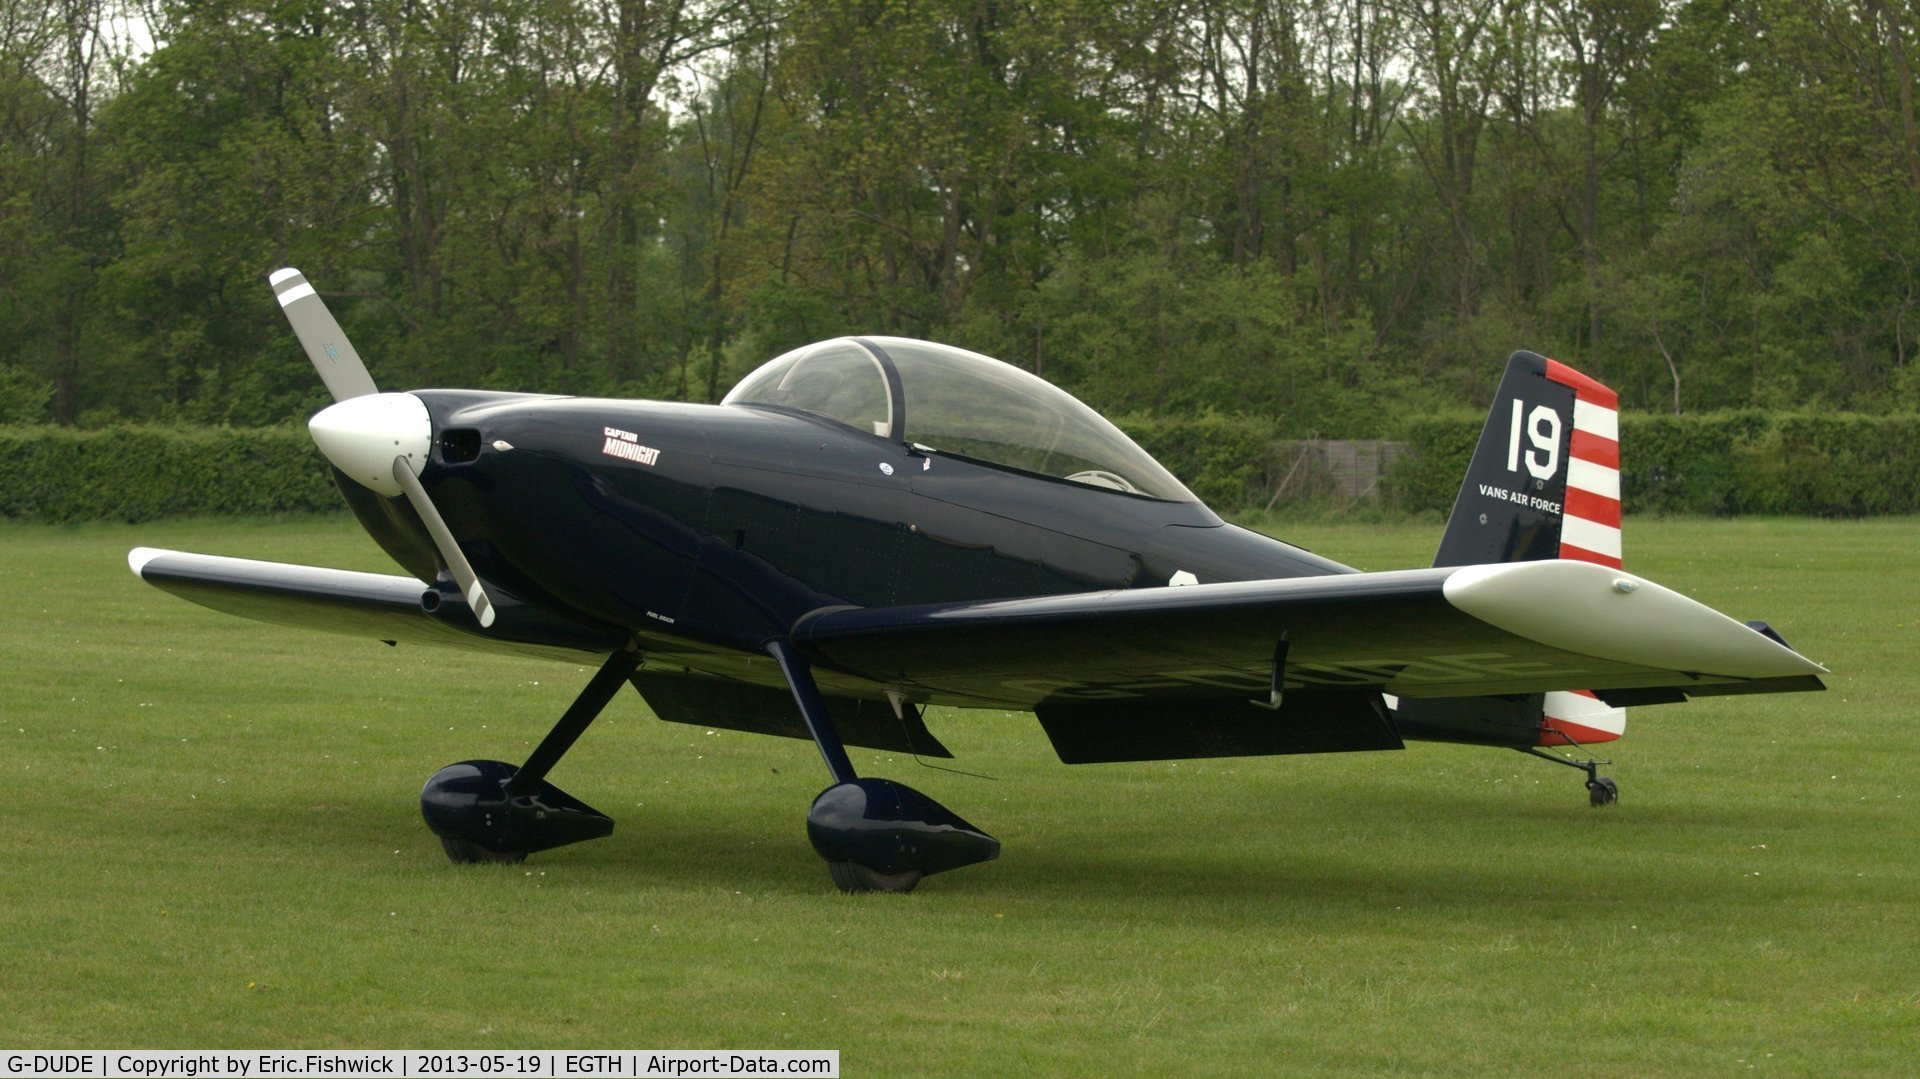 G-DUDE, 2004 Vans RV-8 C/N PFA 303-13246, G-DUDE at Shuttleworth Flying Day and LAA Party in the Park, May 2013.